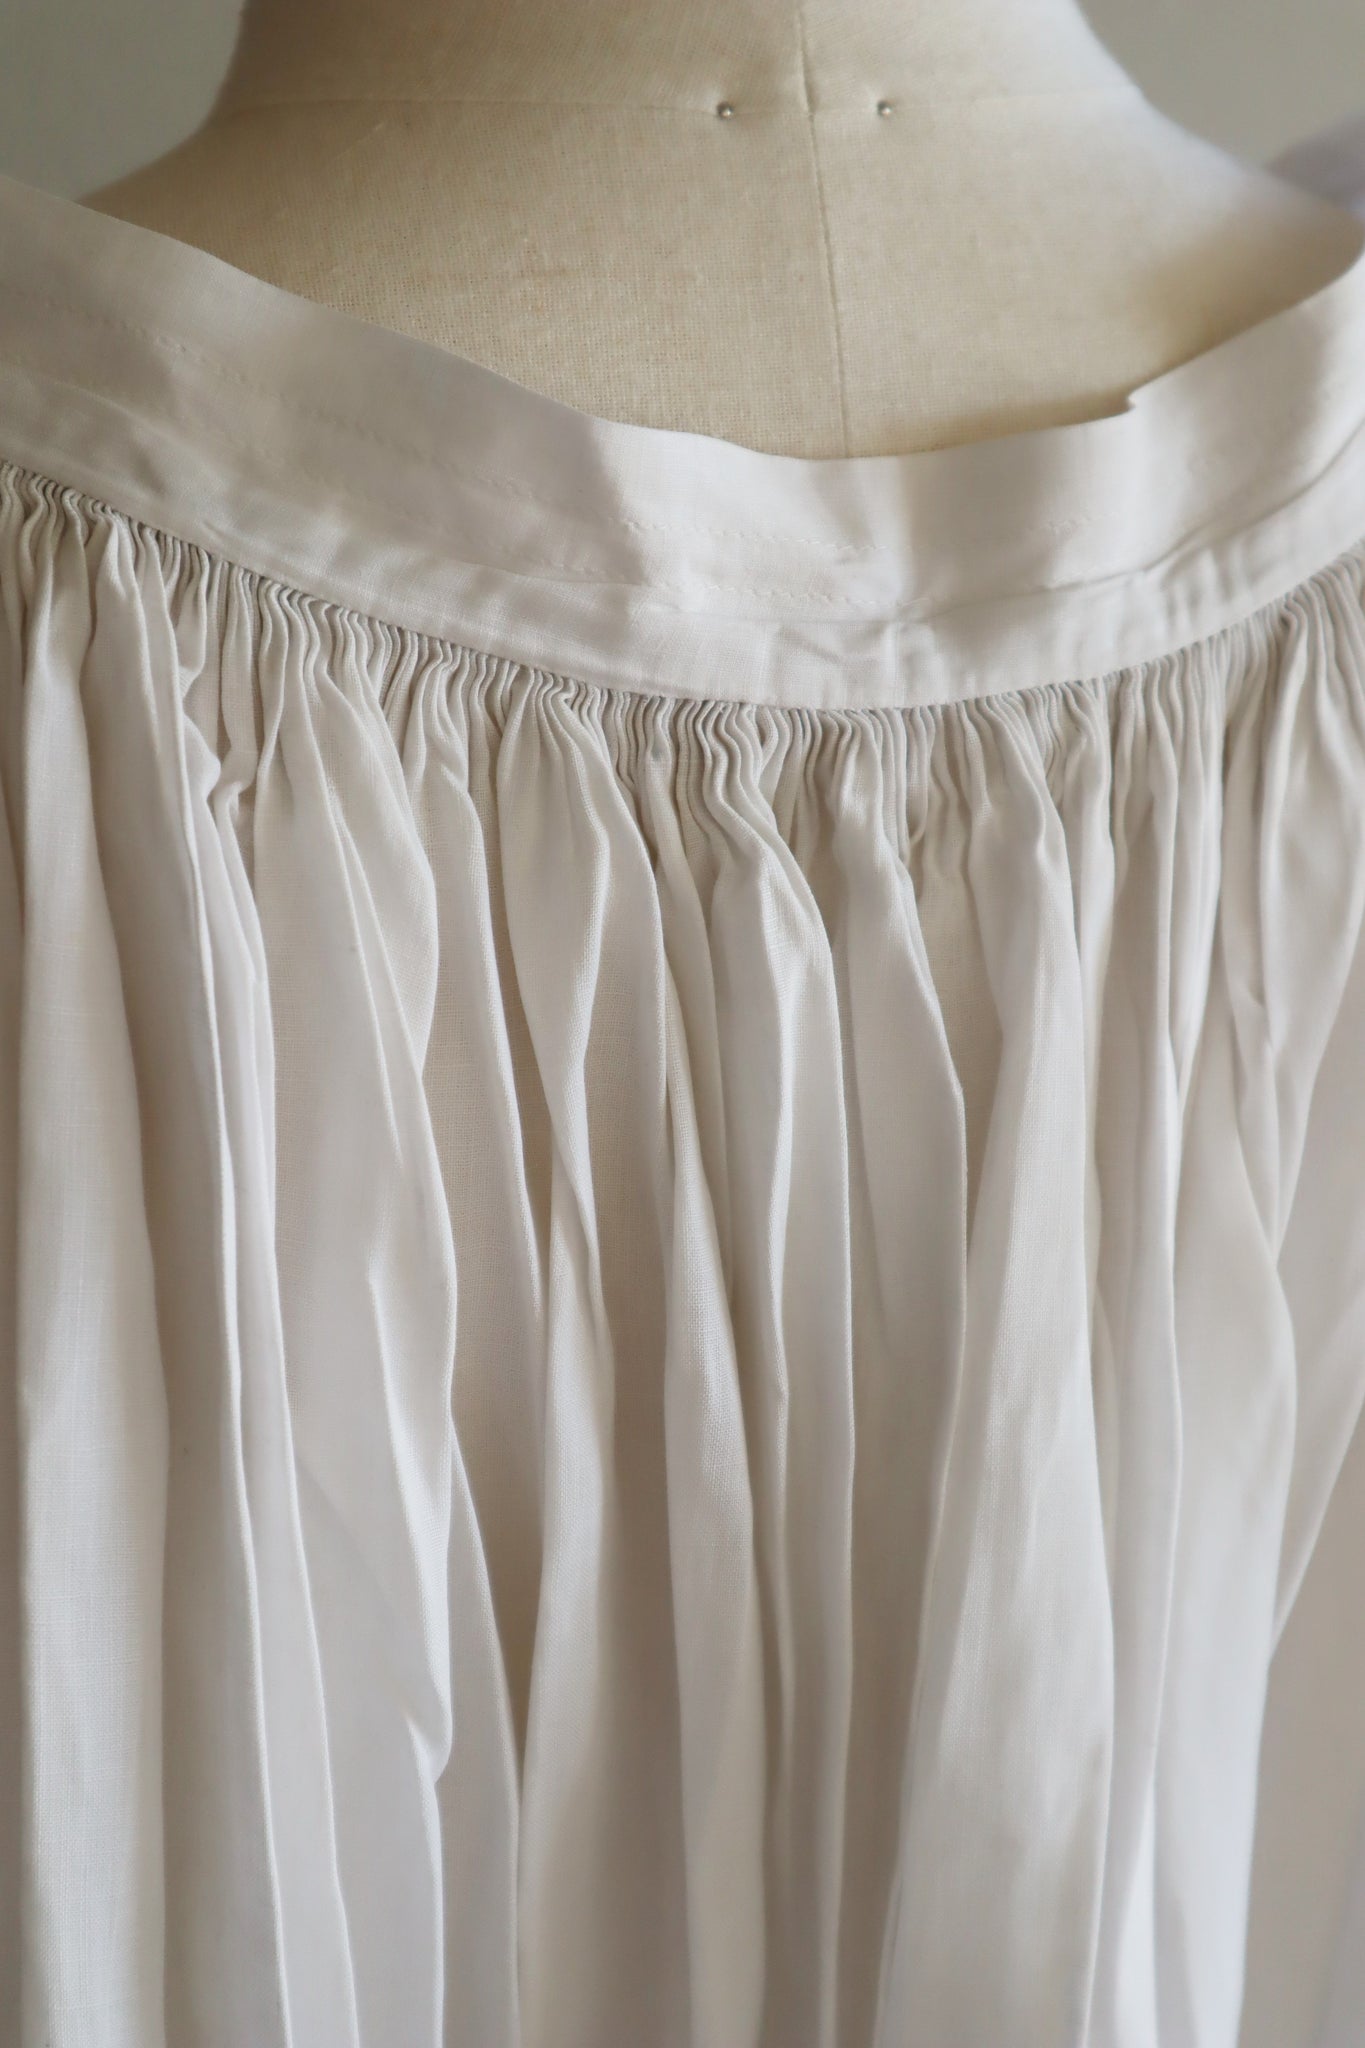 1900s White Pleated Linen Church Smock